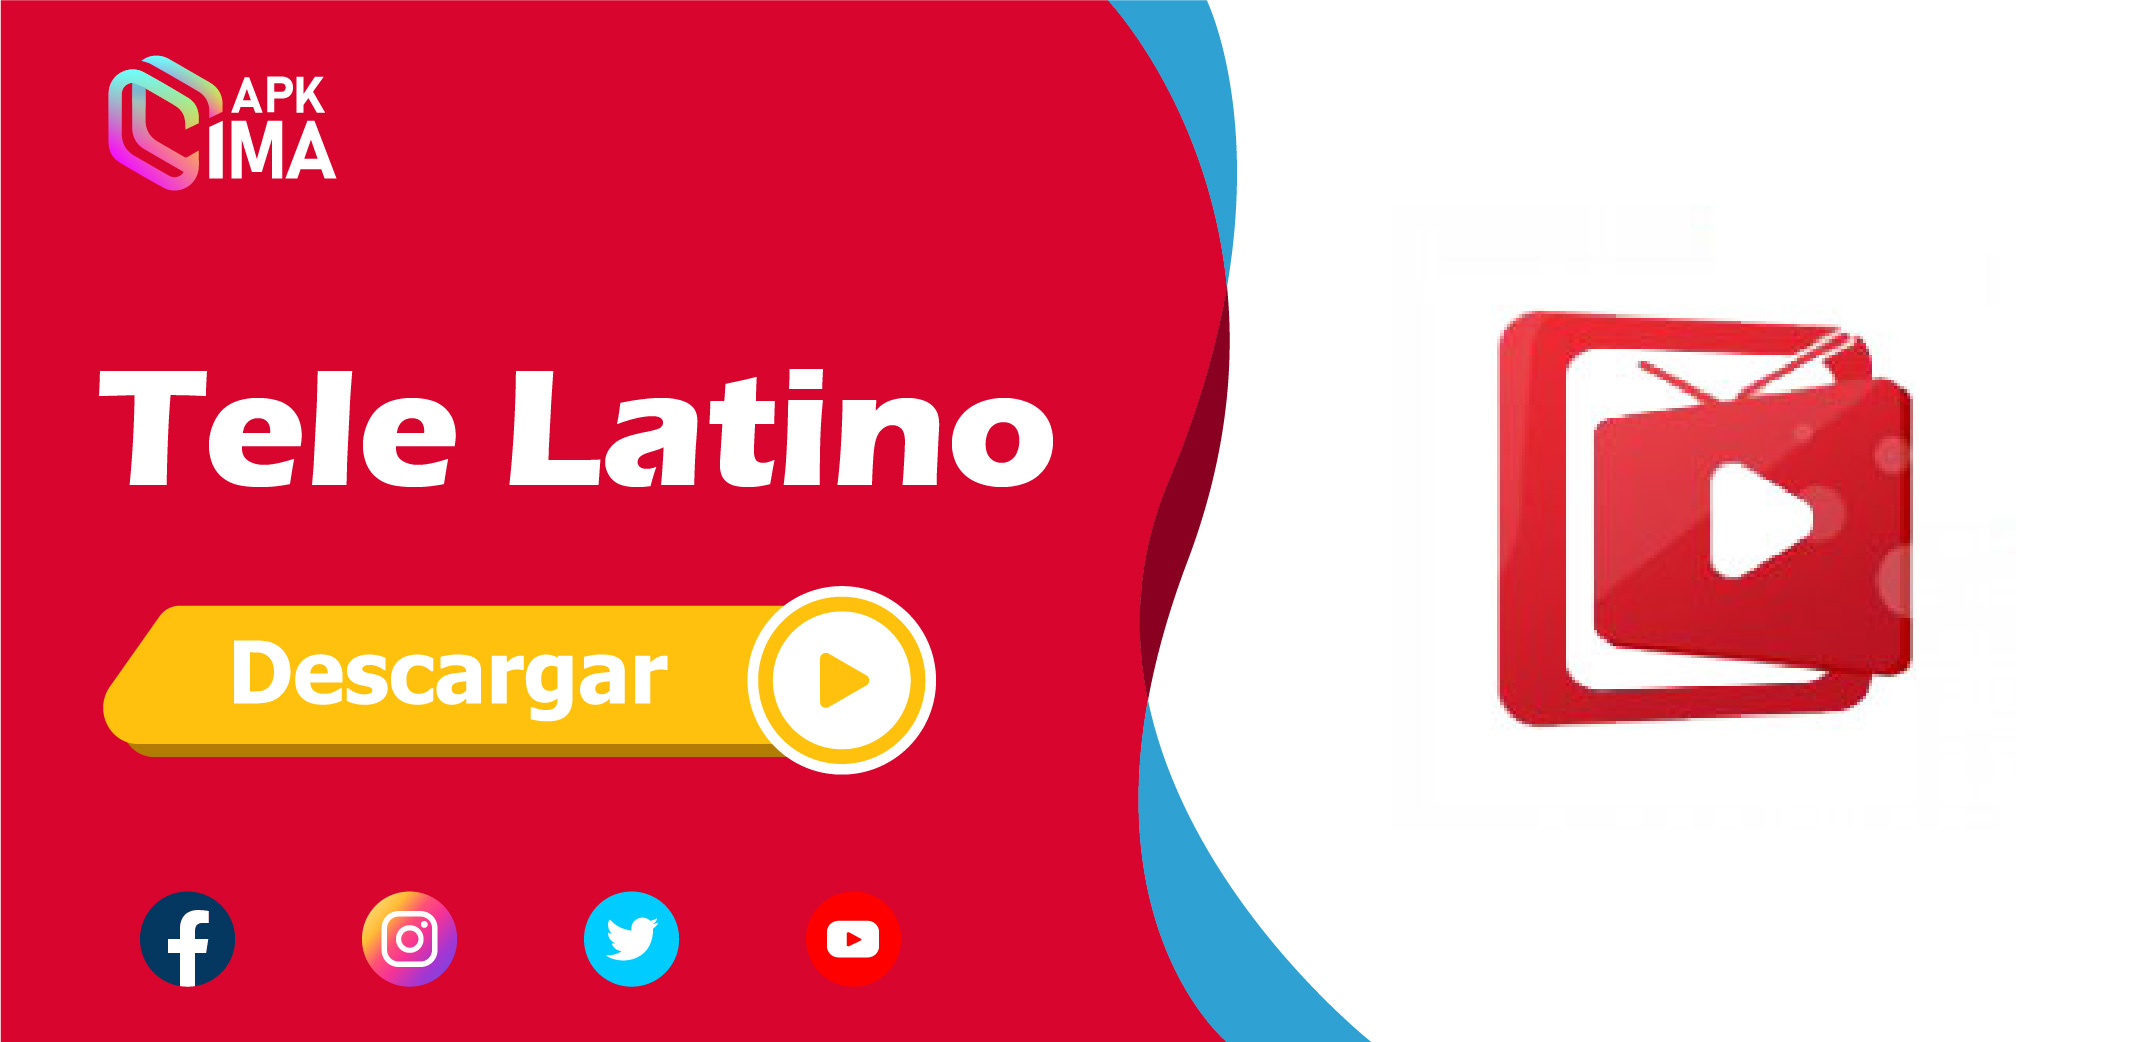 Tele Latino APK 4.4.1 Free Download for Android - Latest version